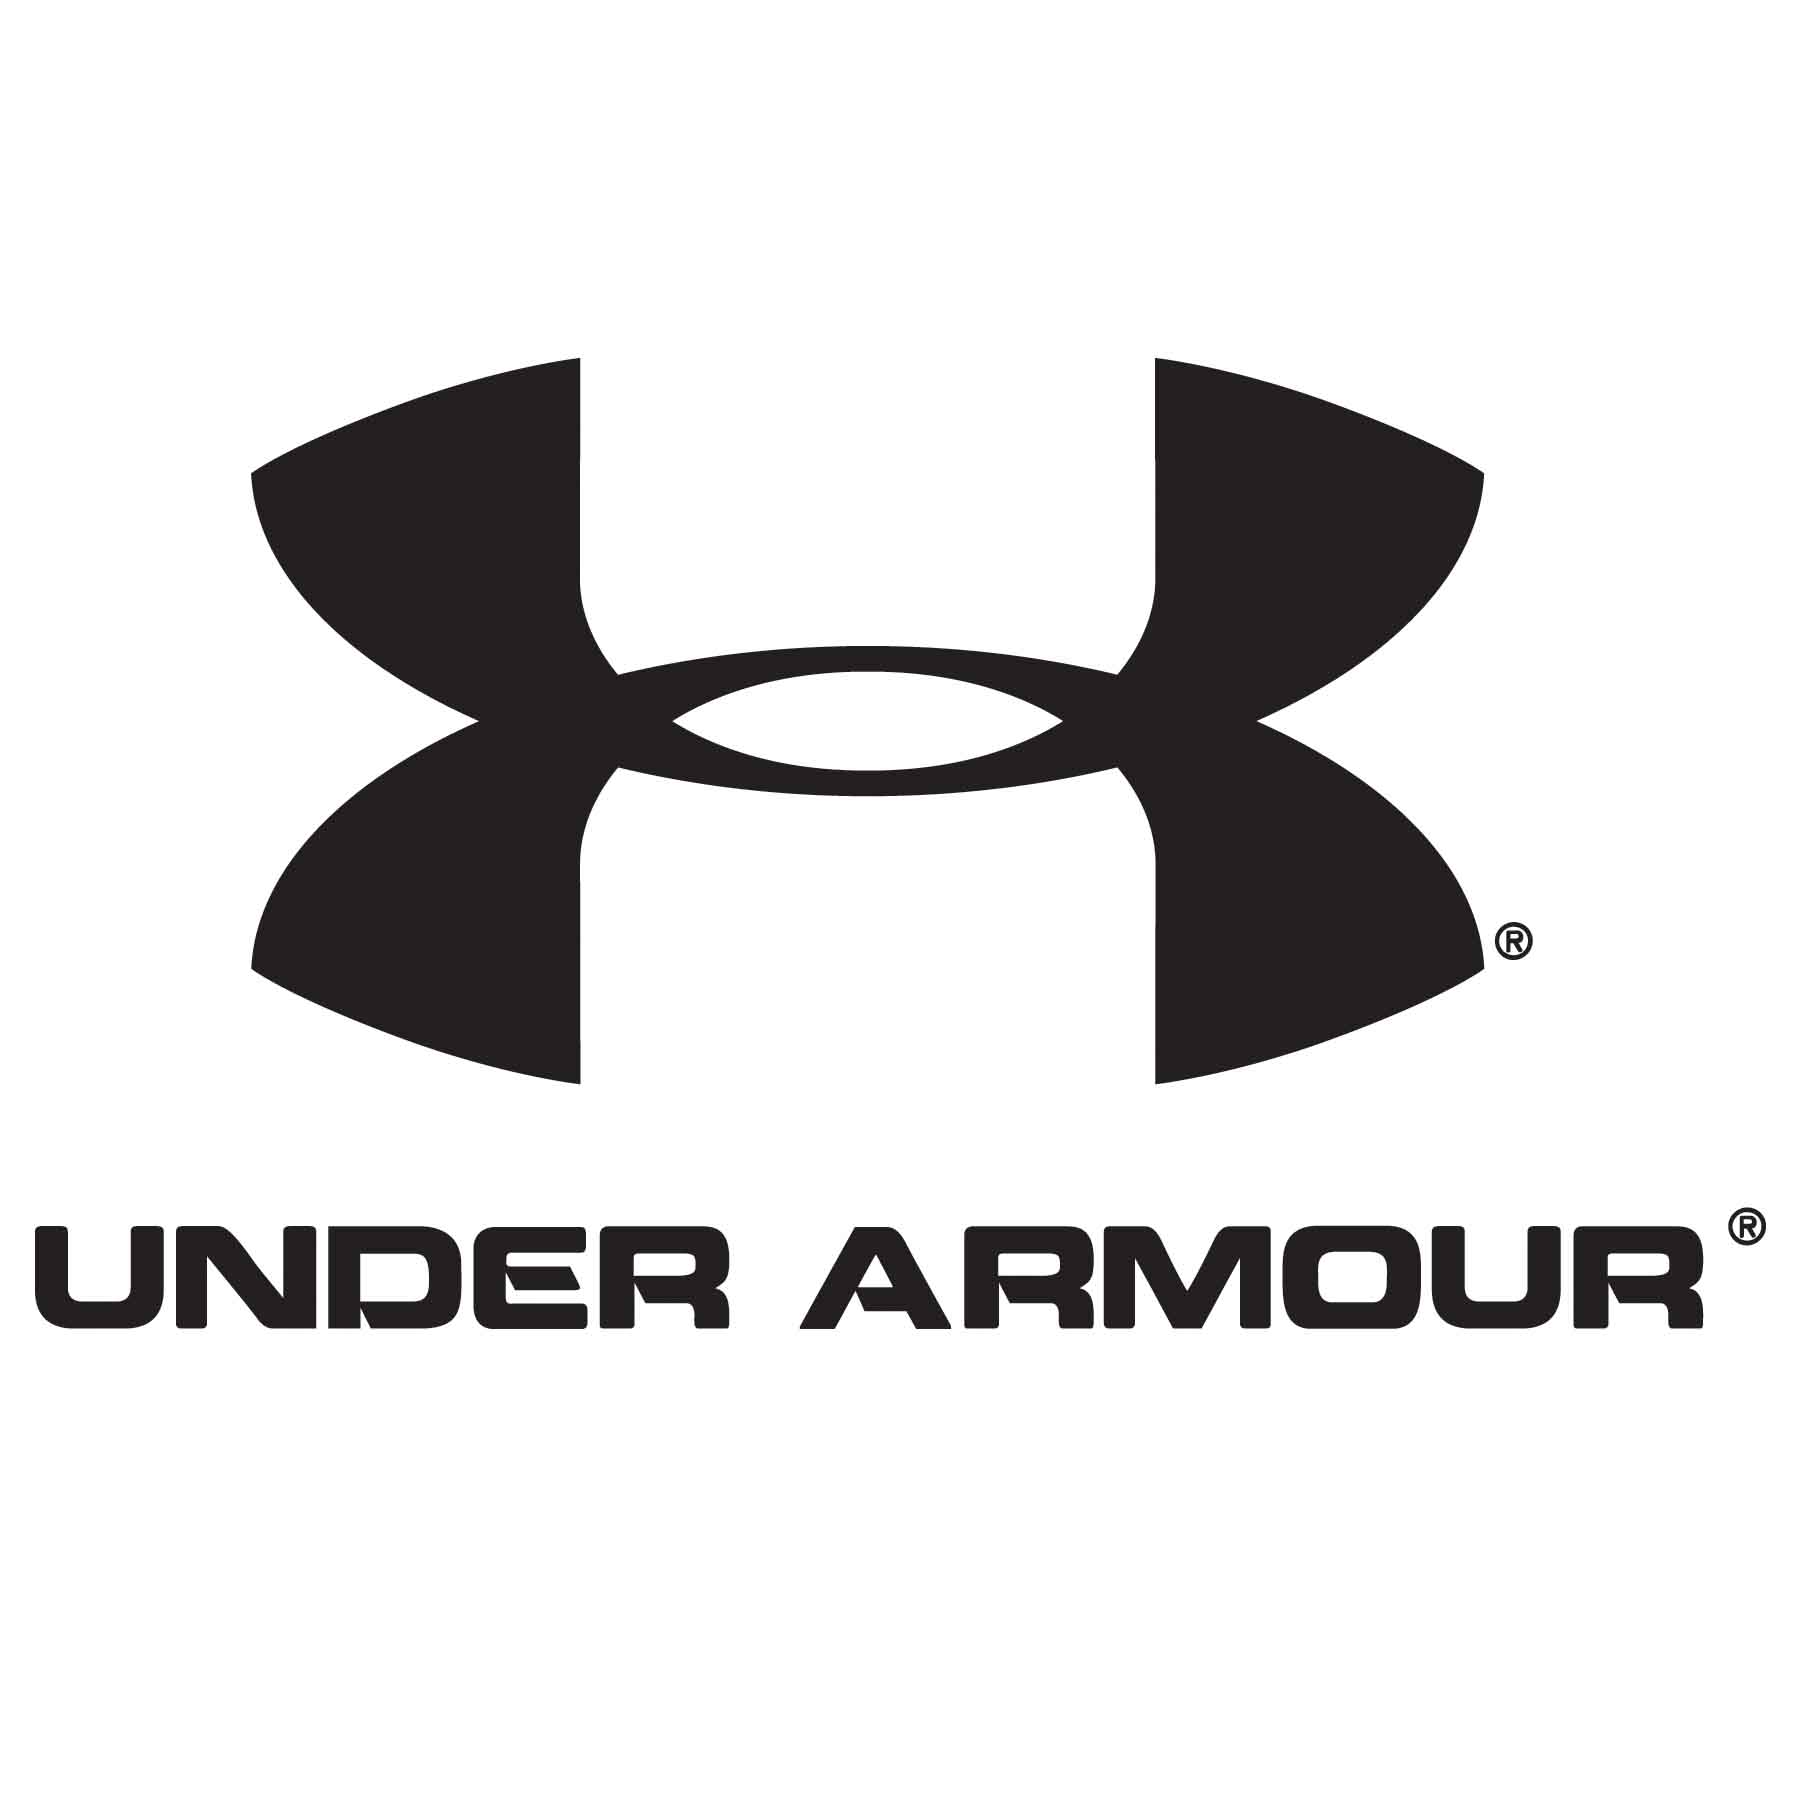 share under armour logo wallpaper gallery to the pinterest facebook